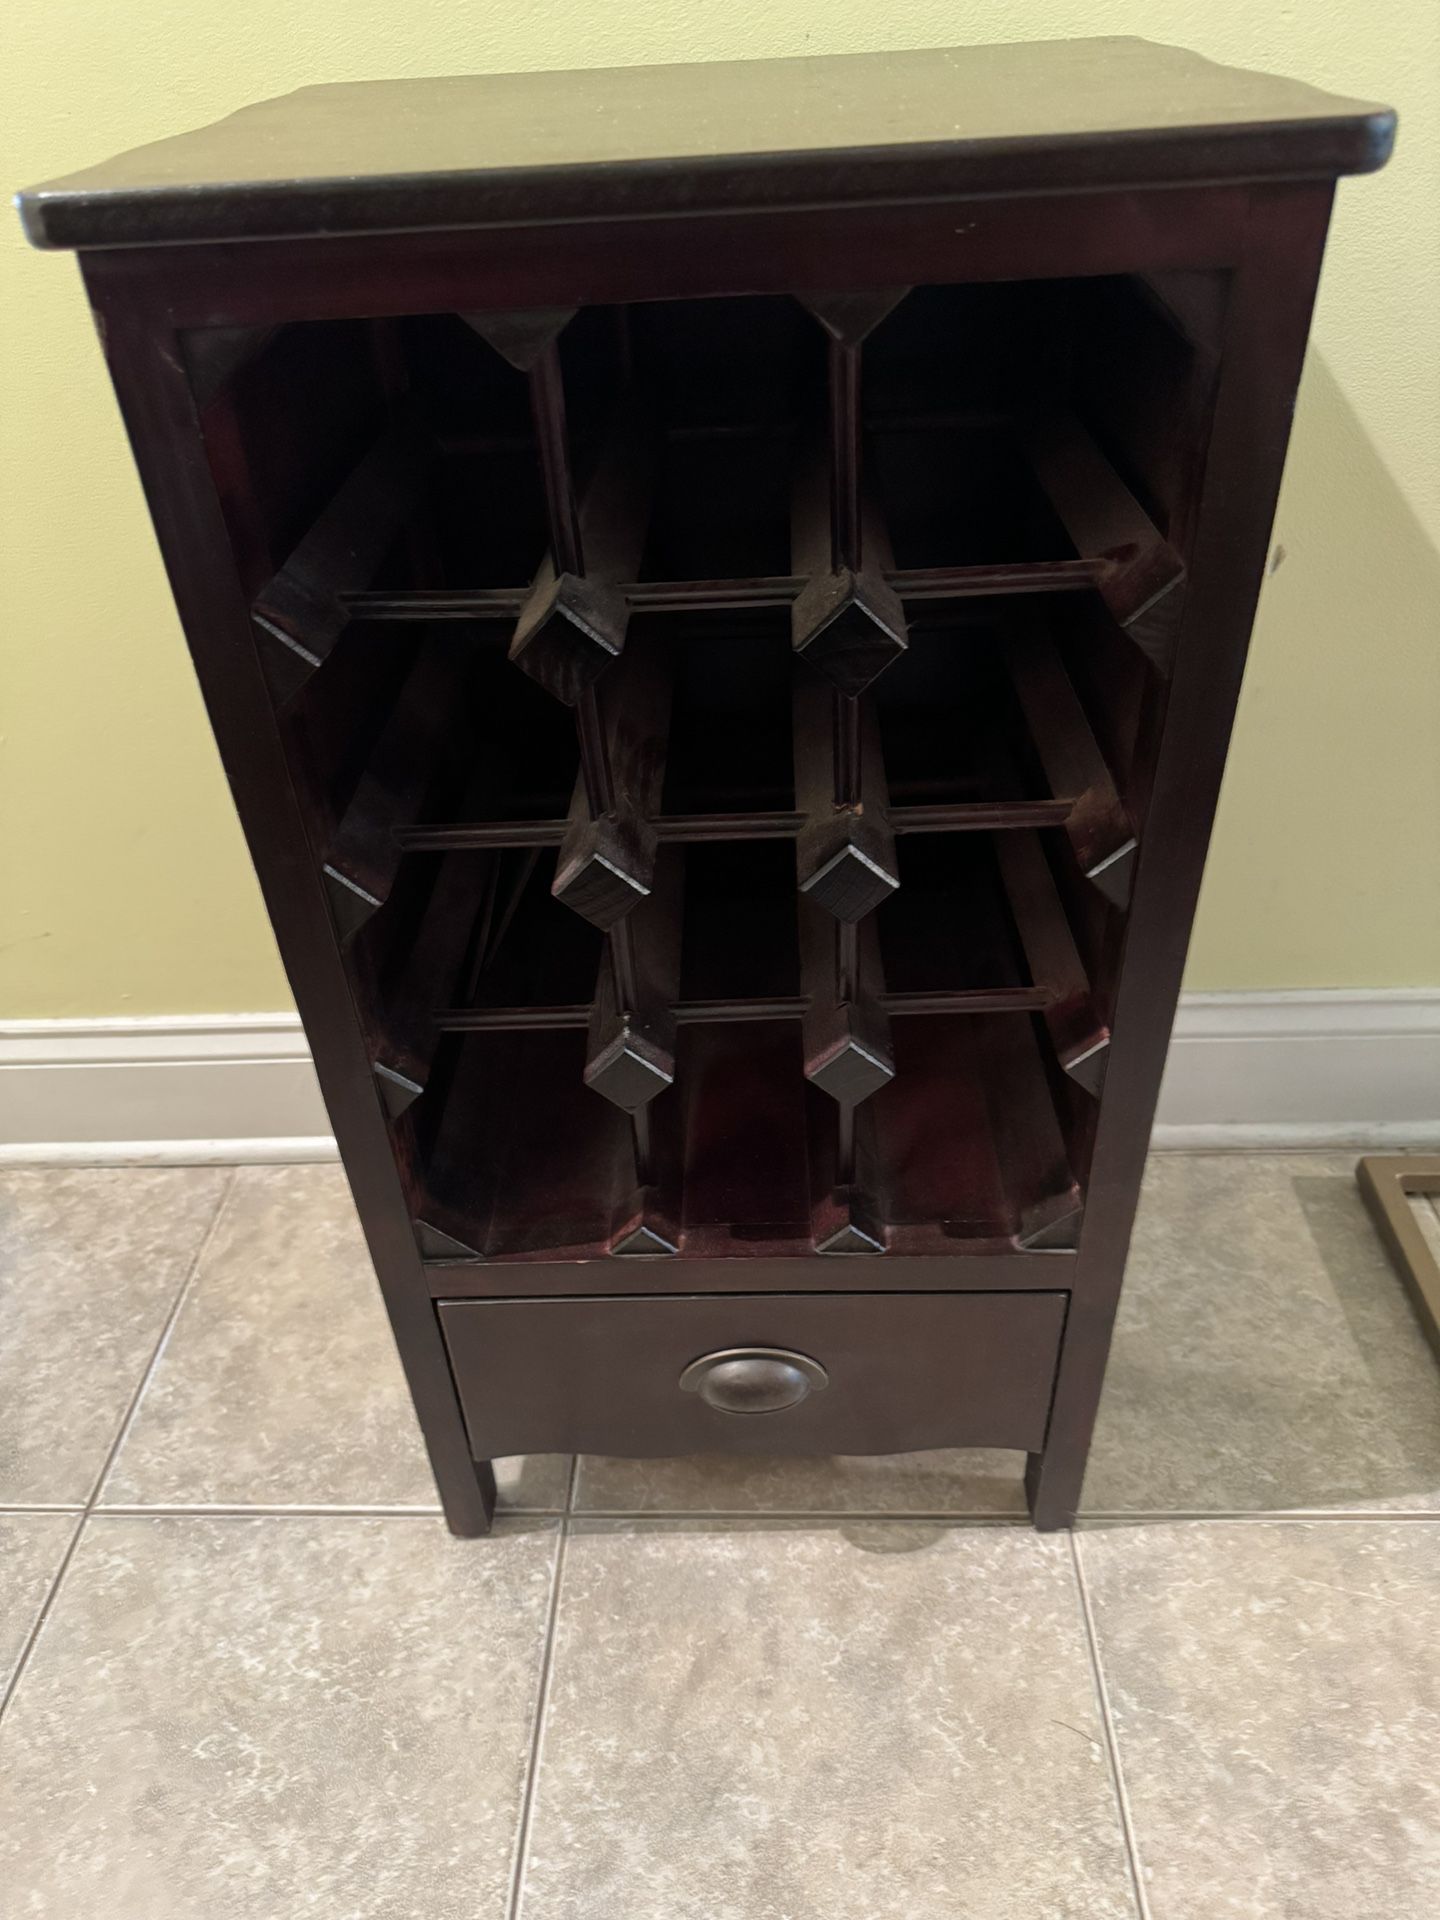 12 bottle  wine Wooden rack with one drawer in GOOD Condition!